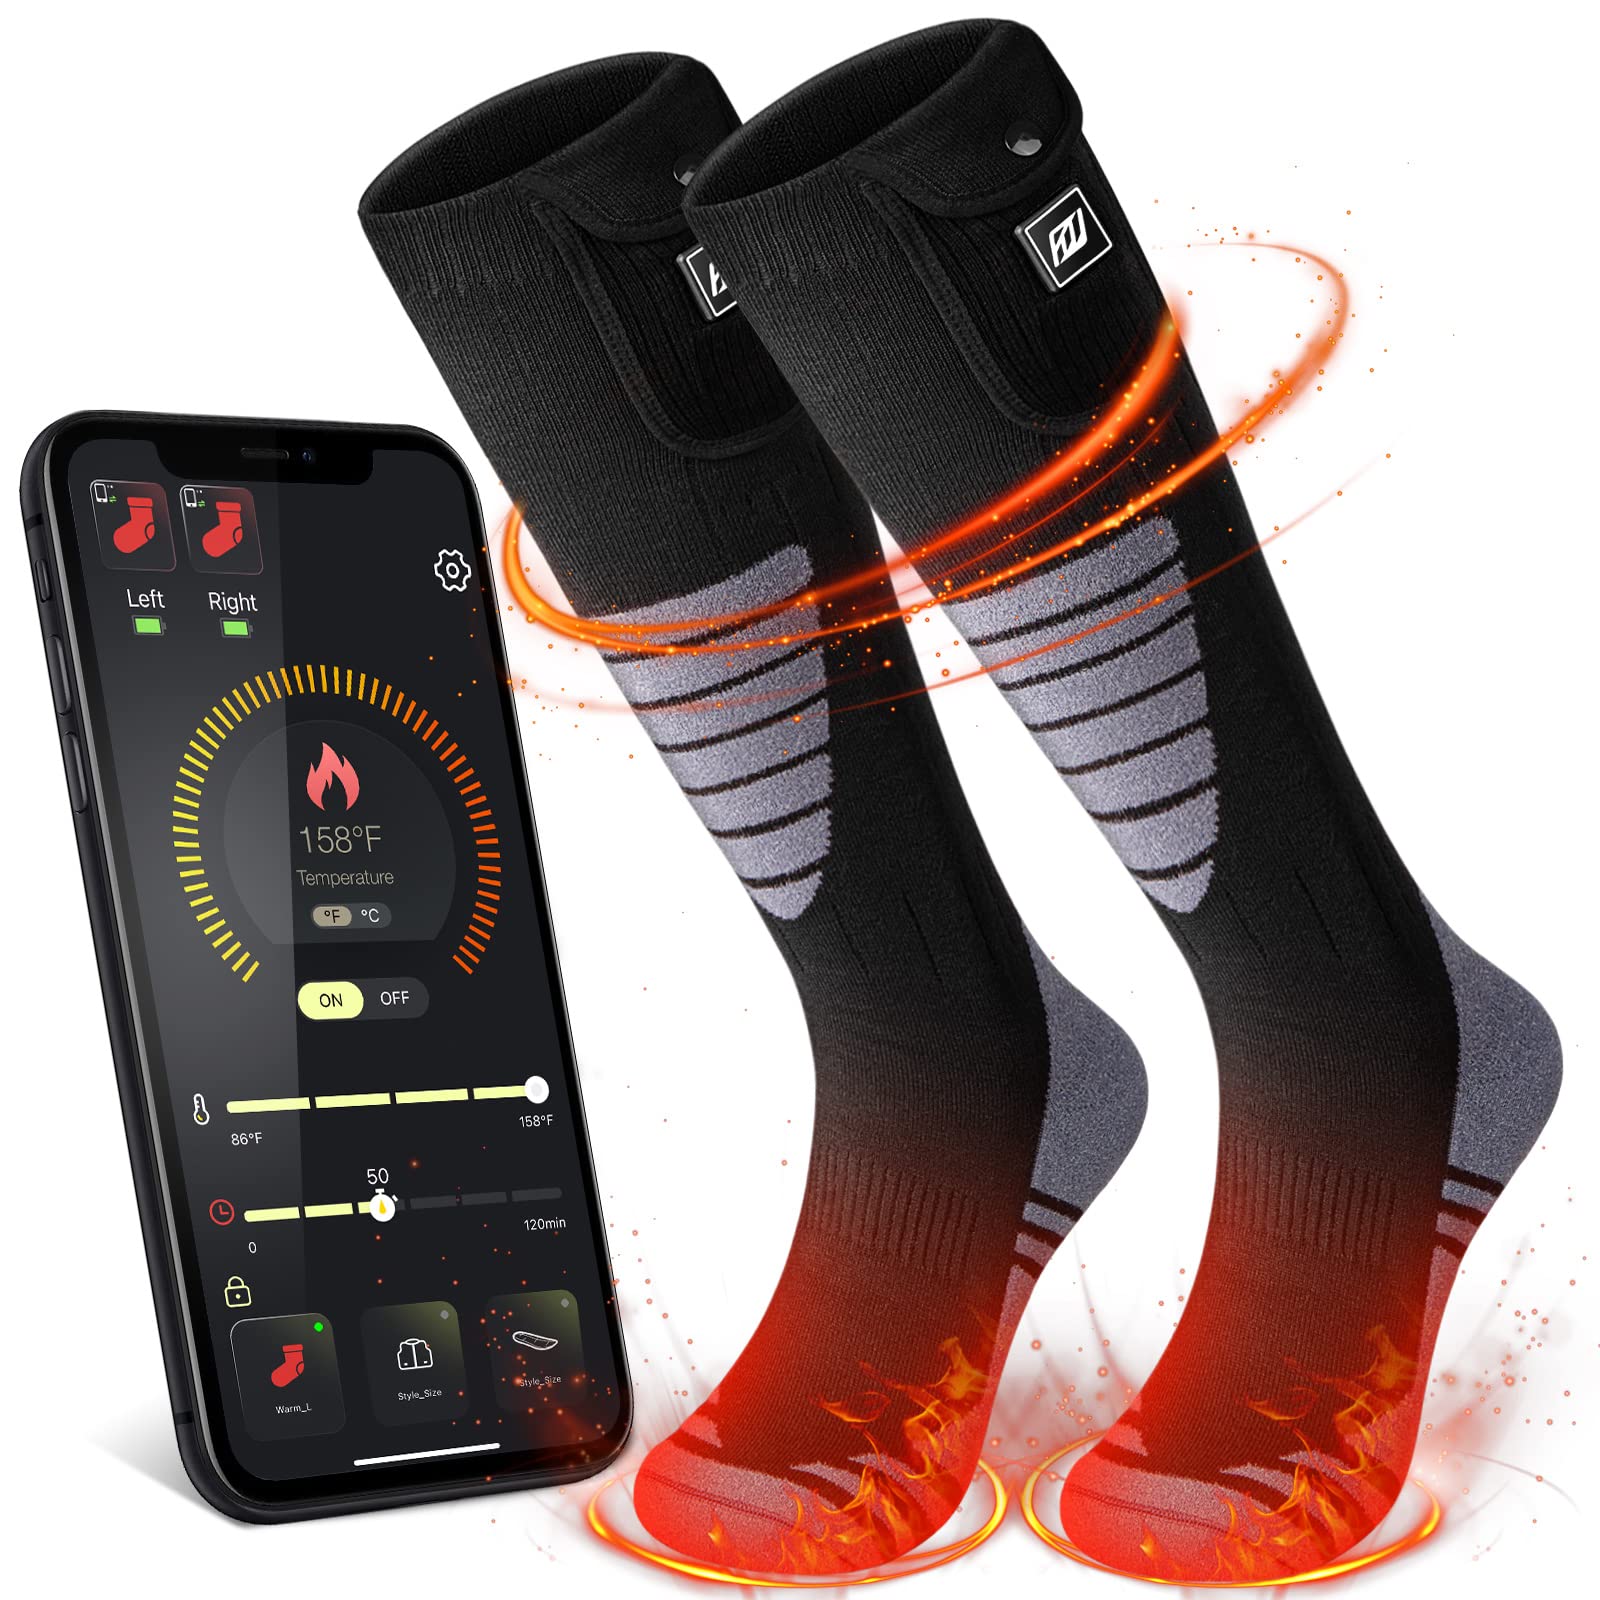 Heated Socks for Men Women Rechargeable Washable with APP Control